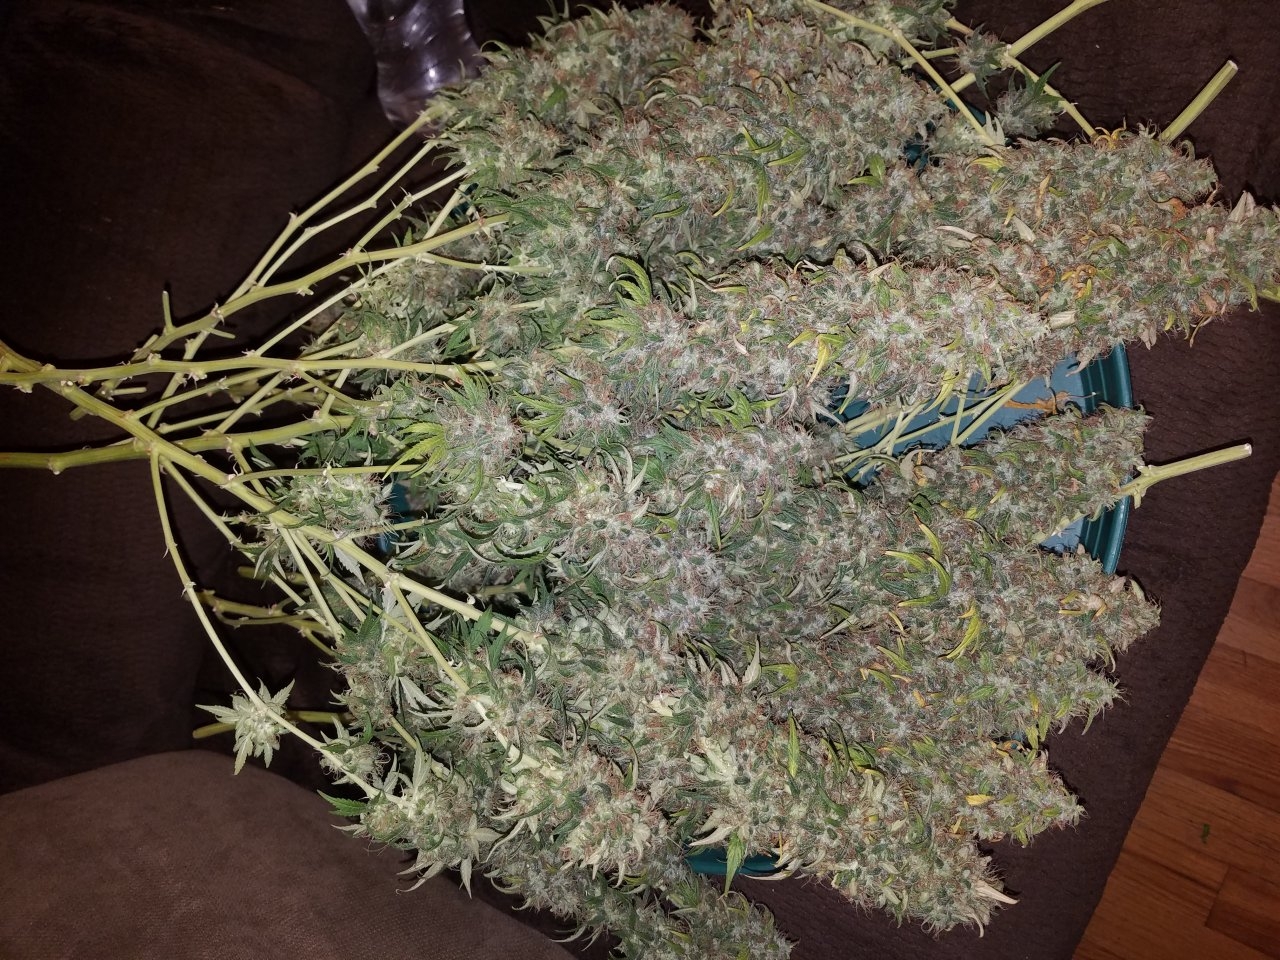 090318 White Widow Harvest Day 69 Day 59 With Hairs 7.jpg